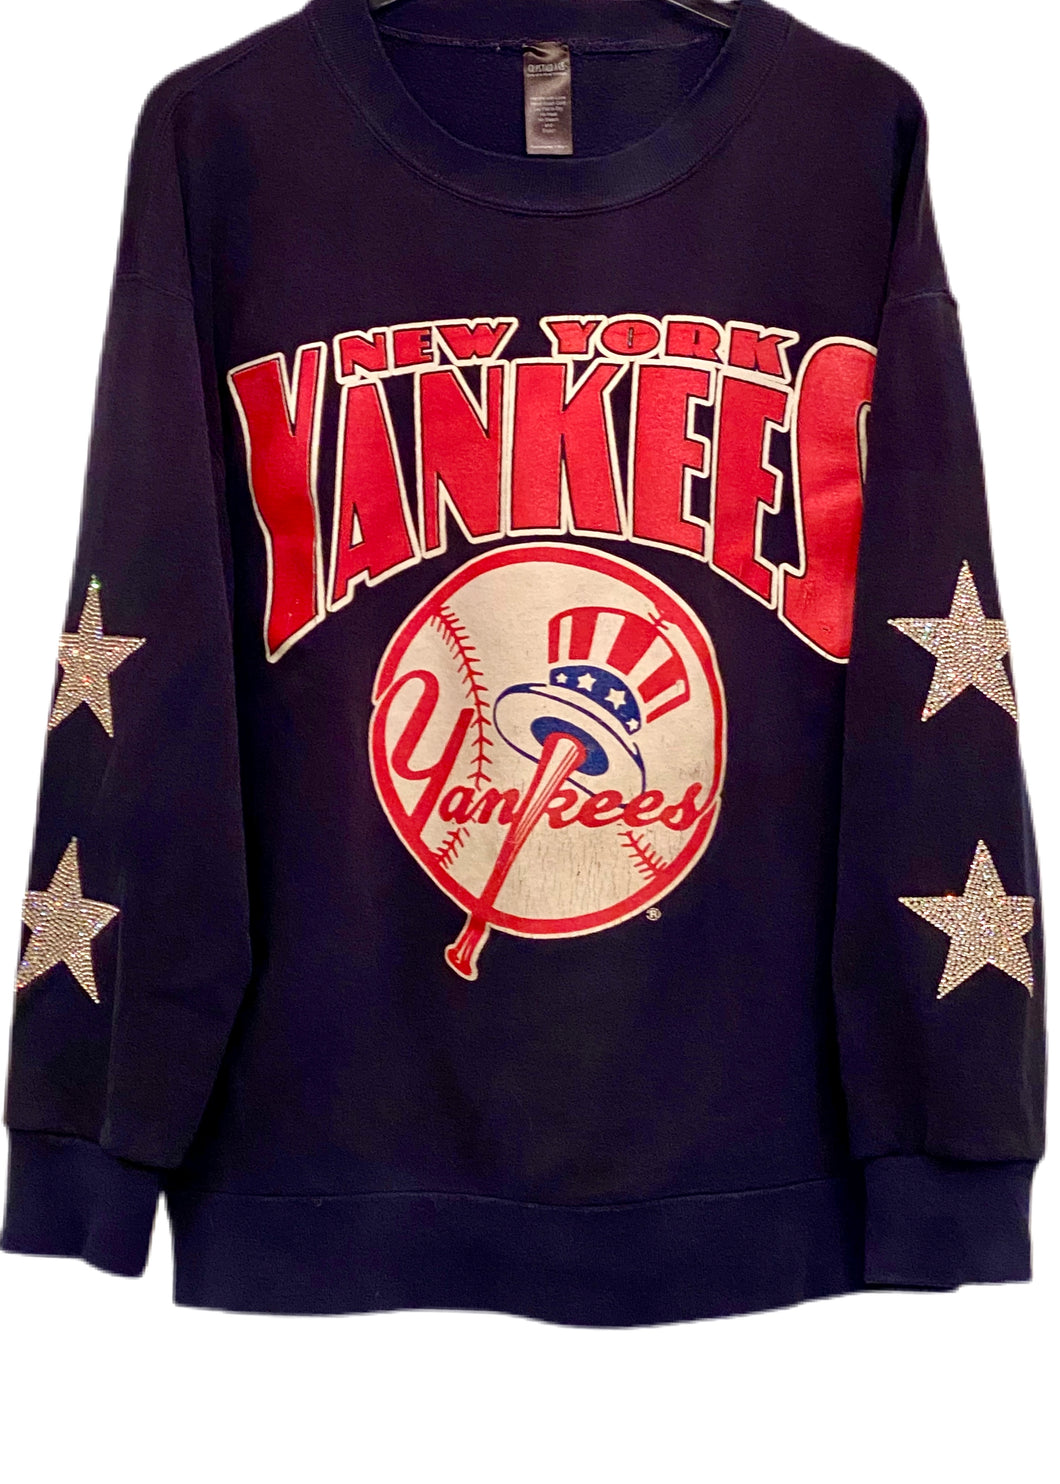 NY Yankees, MLB One of a KIND Vintage Hoodie with Crystal Star Design –  ShopCrystalRags